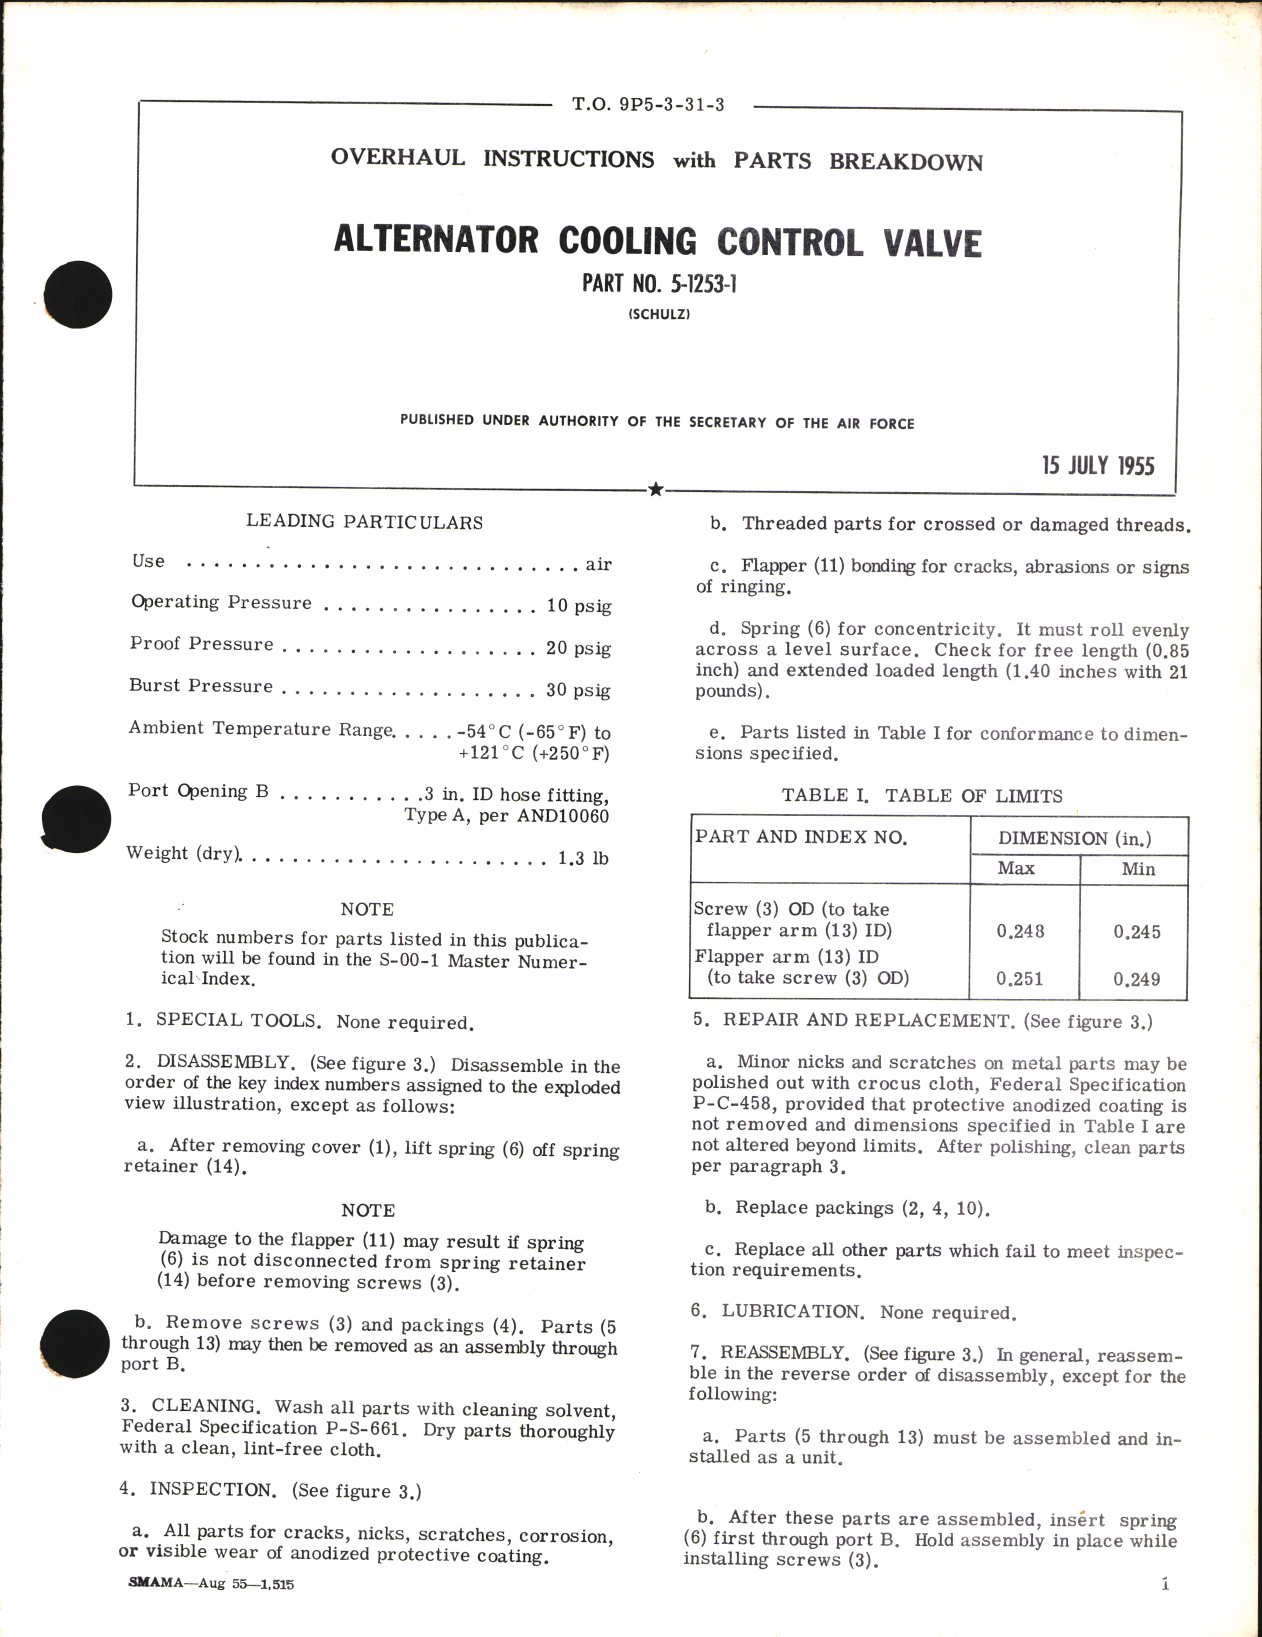 Sample page 1 from AirCorps Library document: Overhaul Instructions with Parts Breakdown for Alternator Cooling control Valve Part No. 5-1253-1